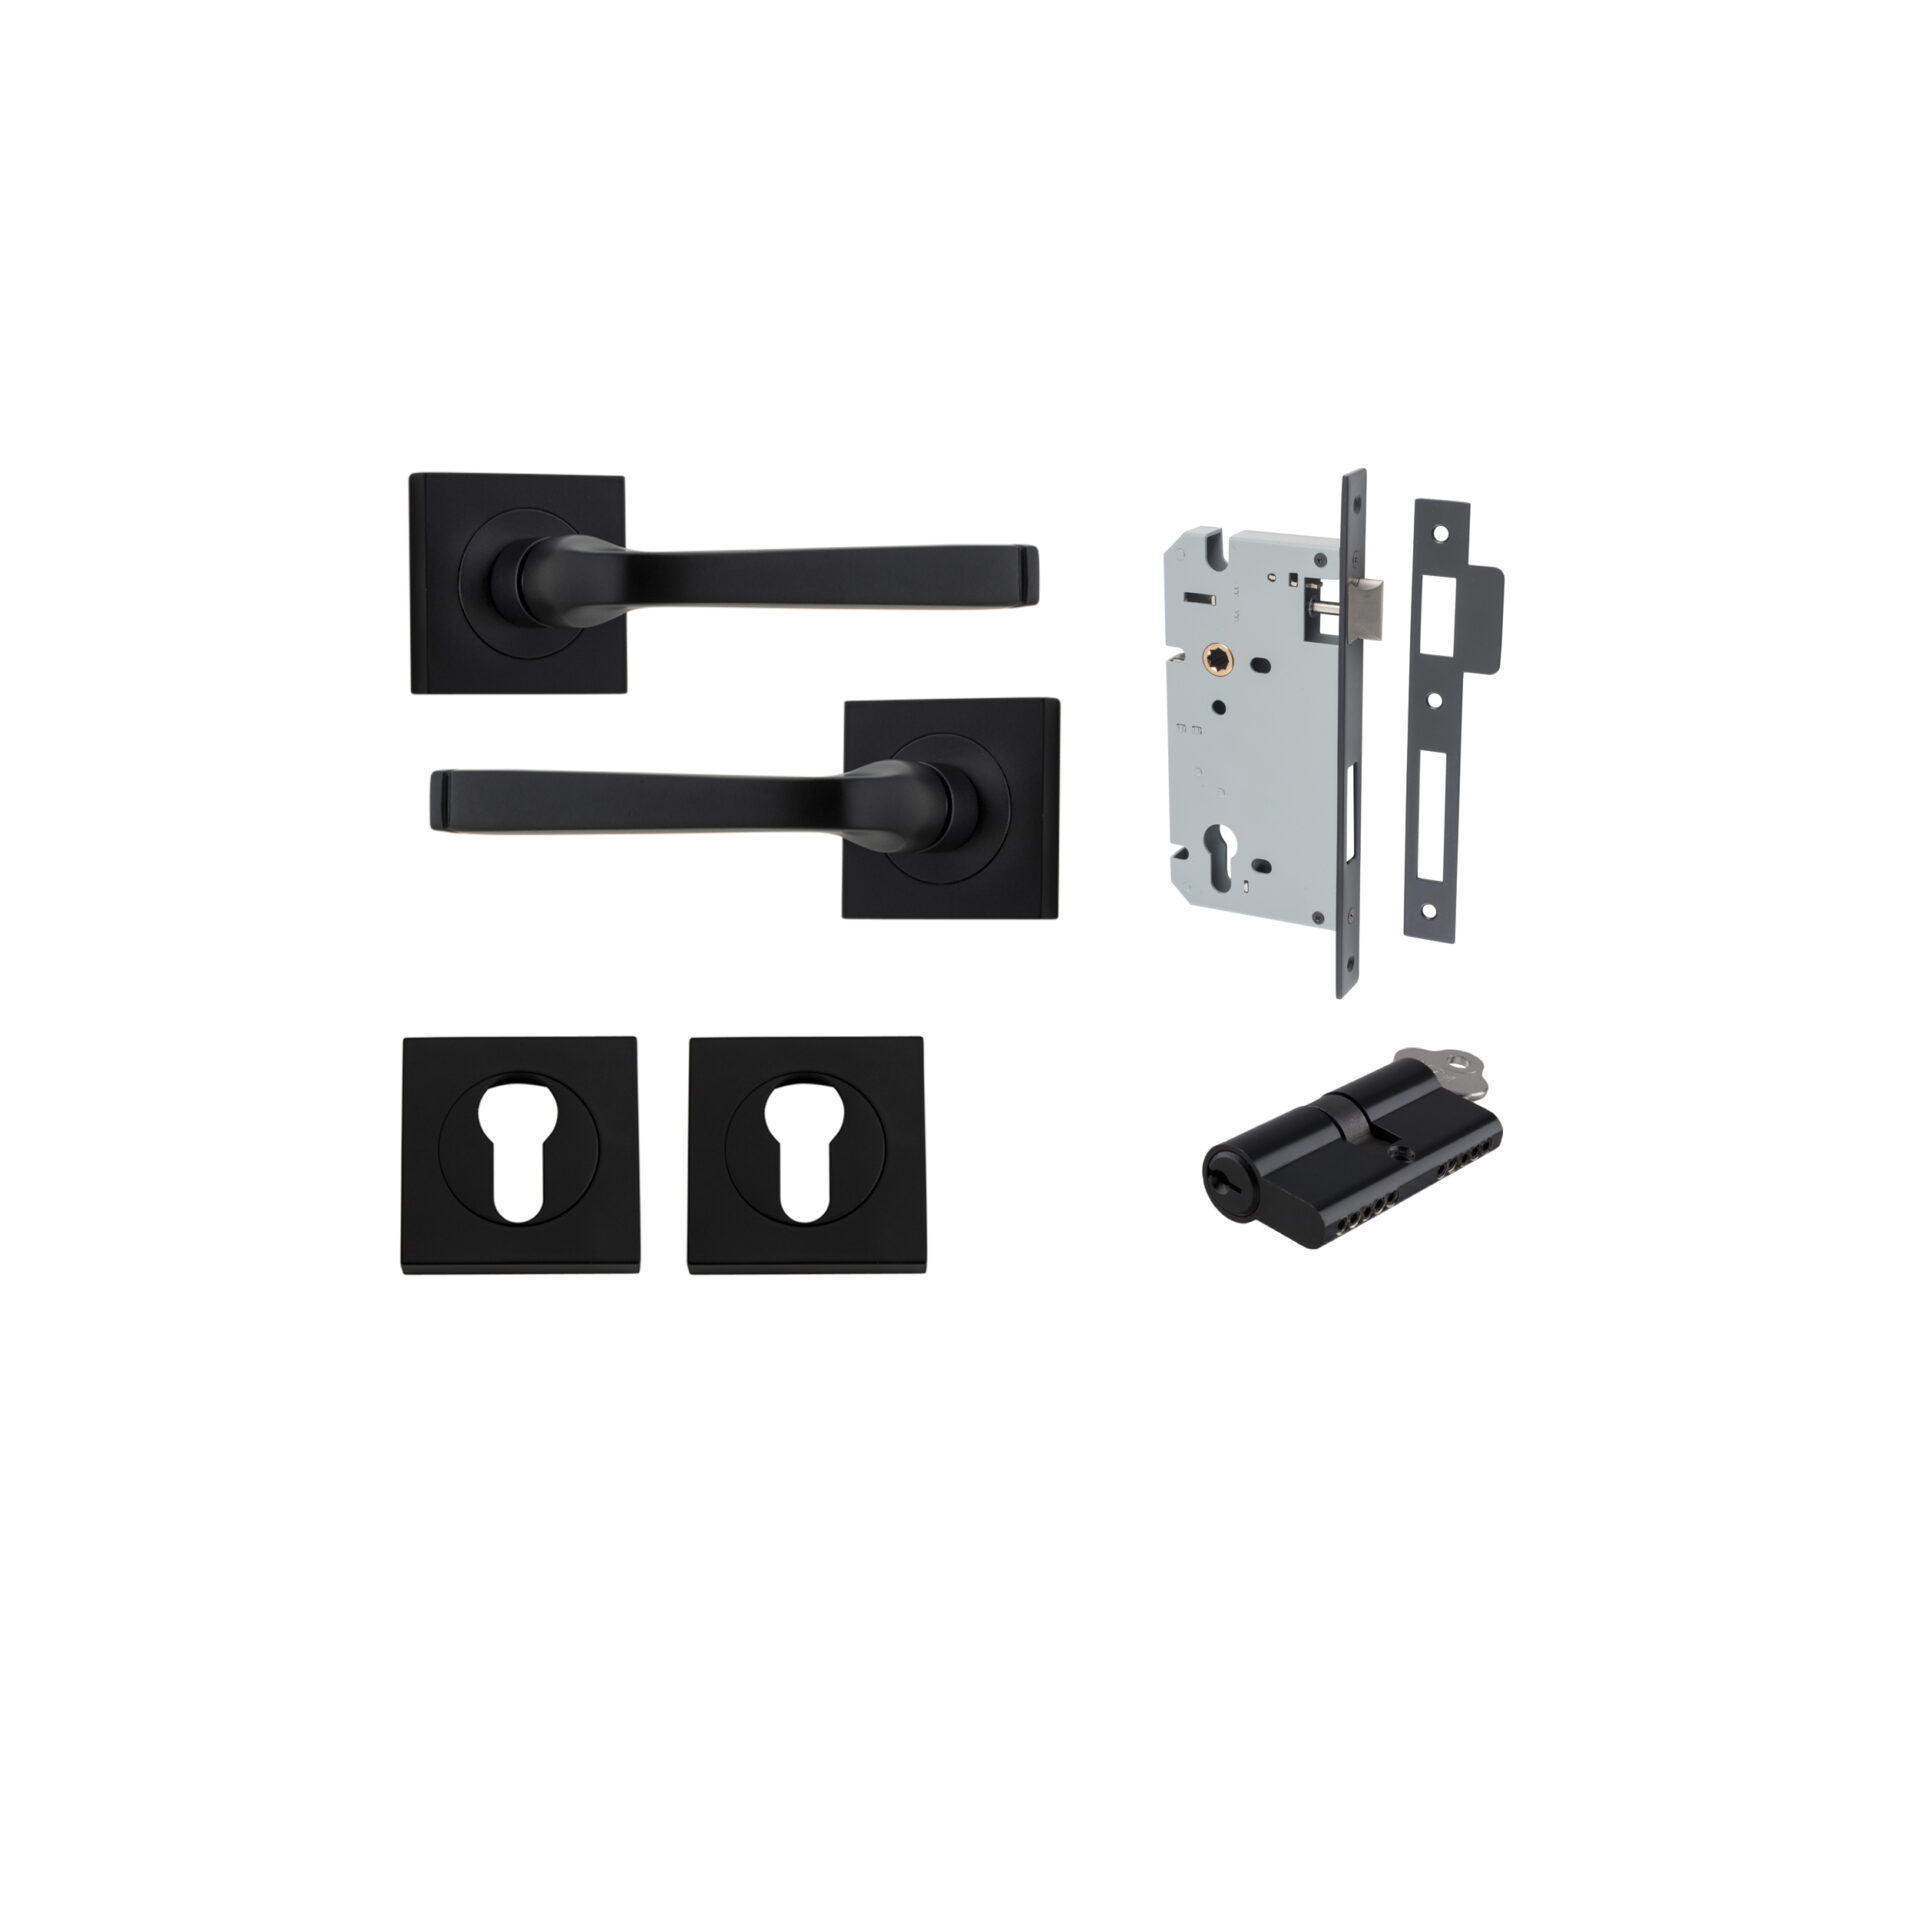 Annecy Lever - Square Rose Entrance Kit with Separate High Security Lock